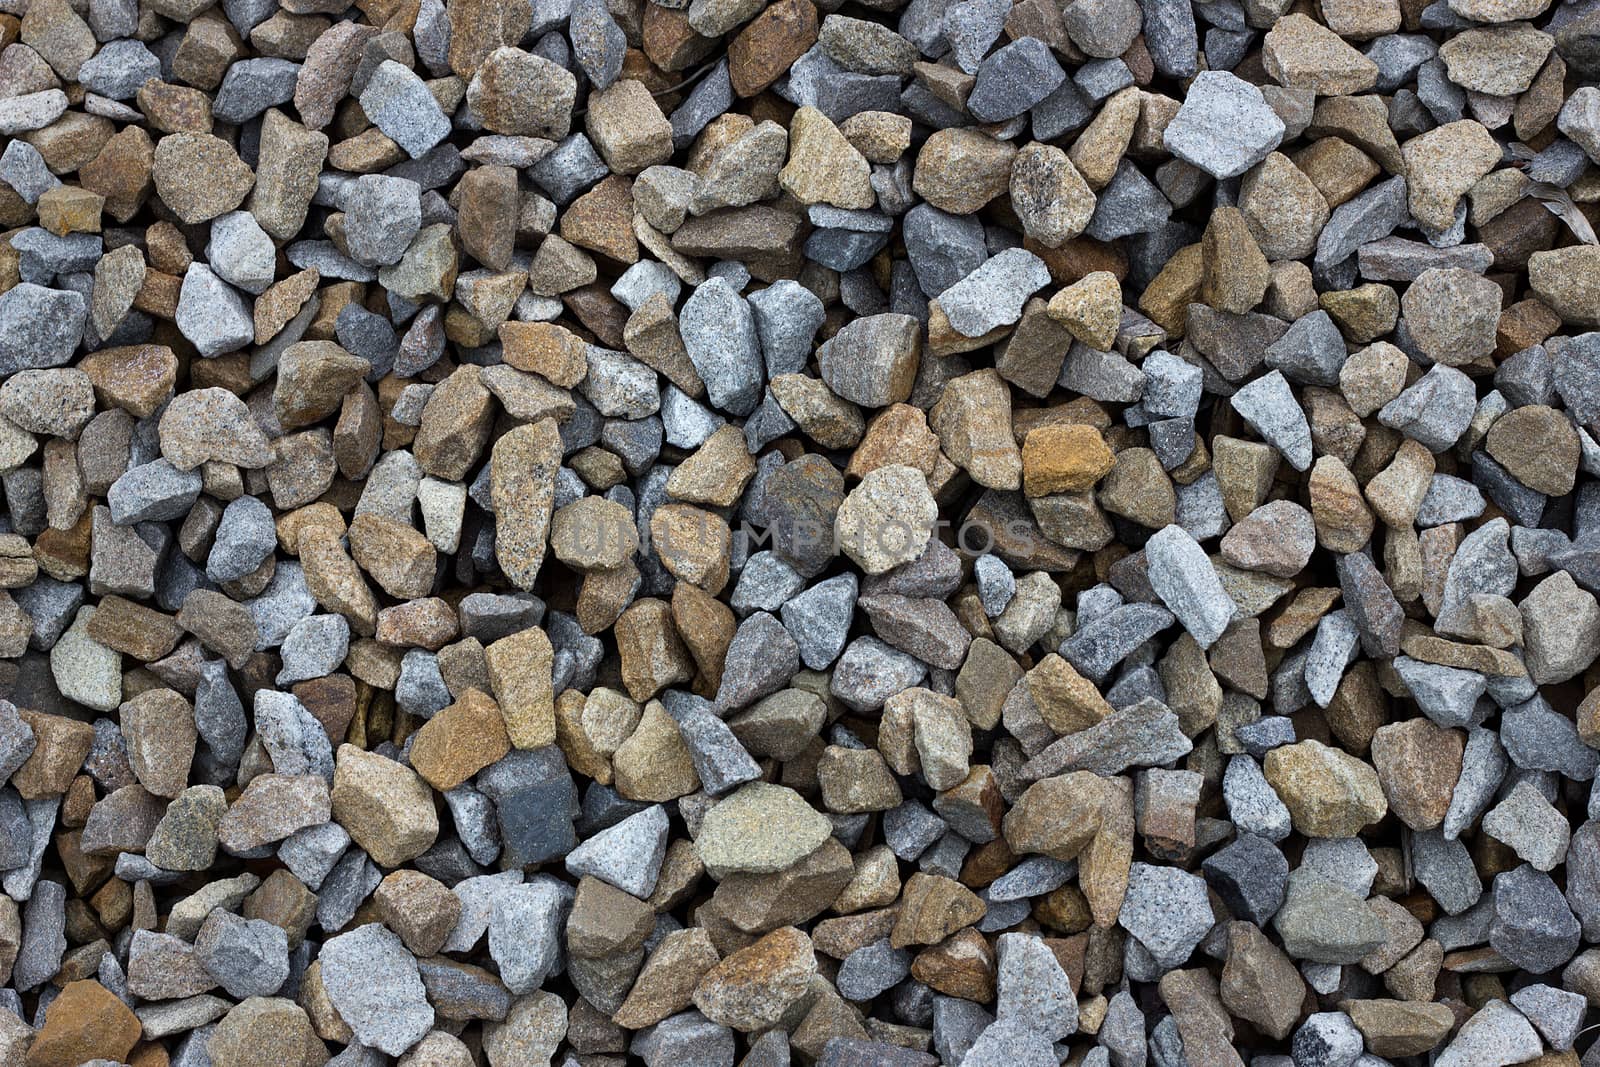 Texture of rubble close-up. Large crushed stone